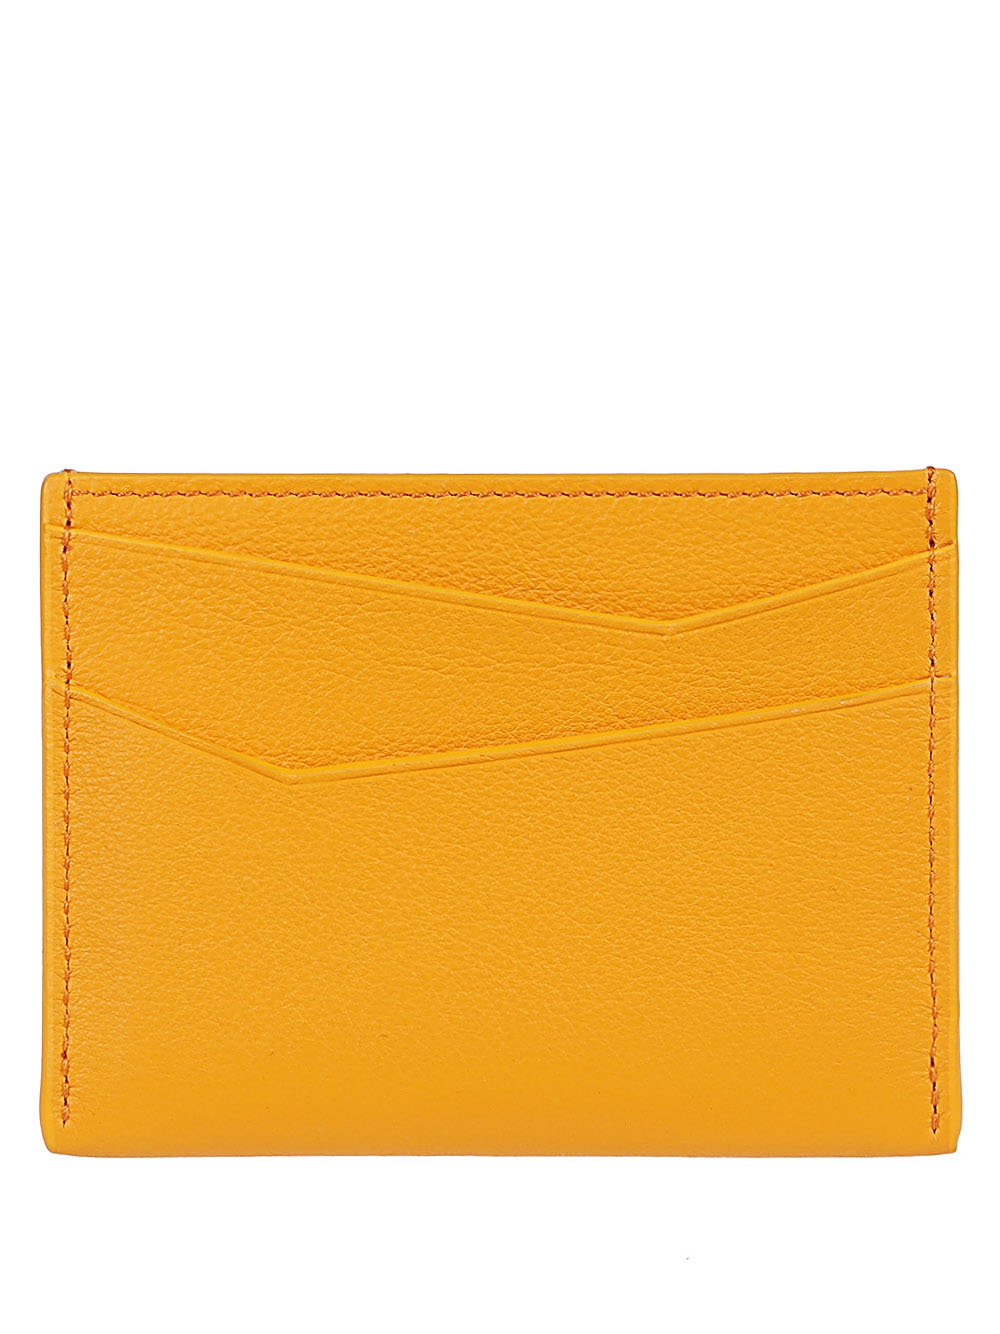 Credit card holder with logo - 2